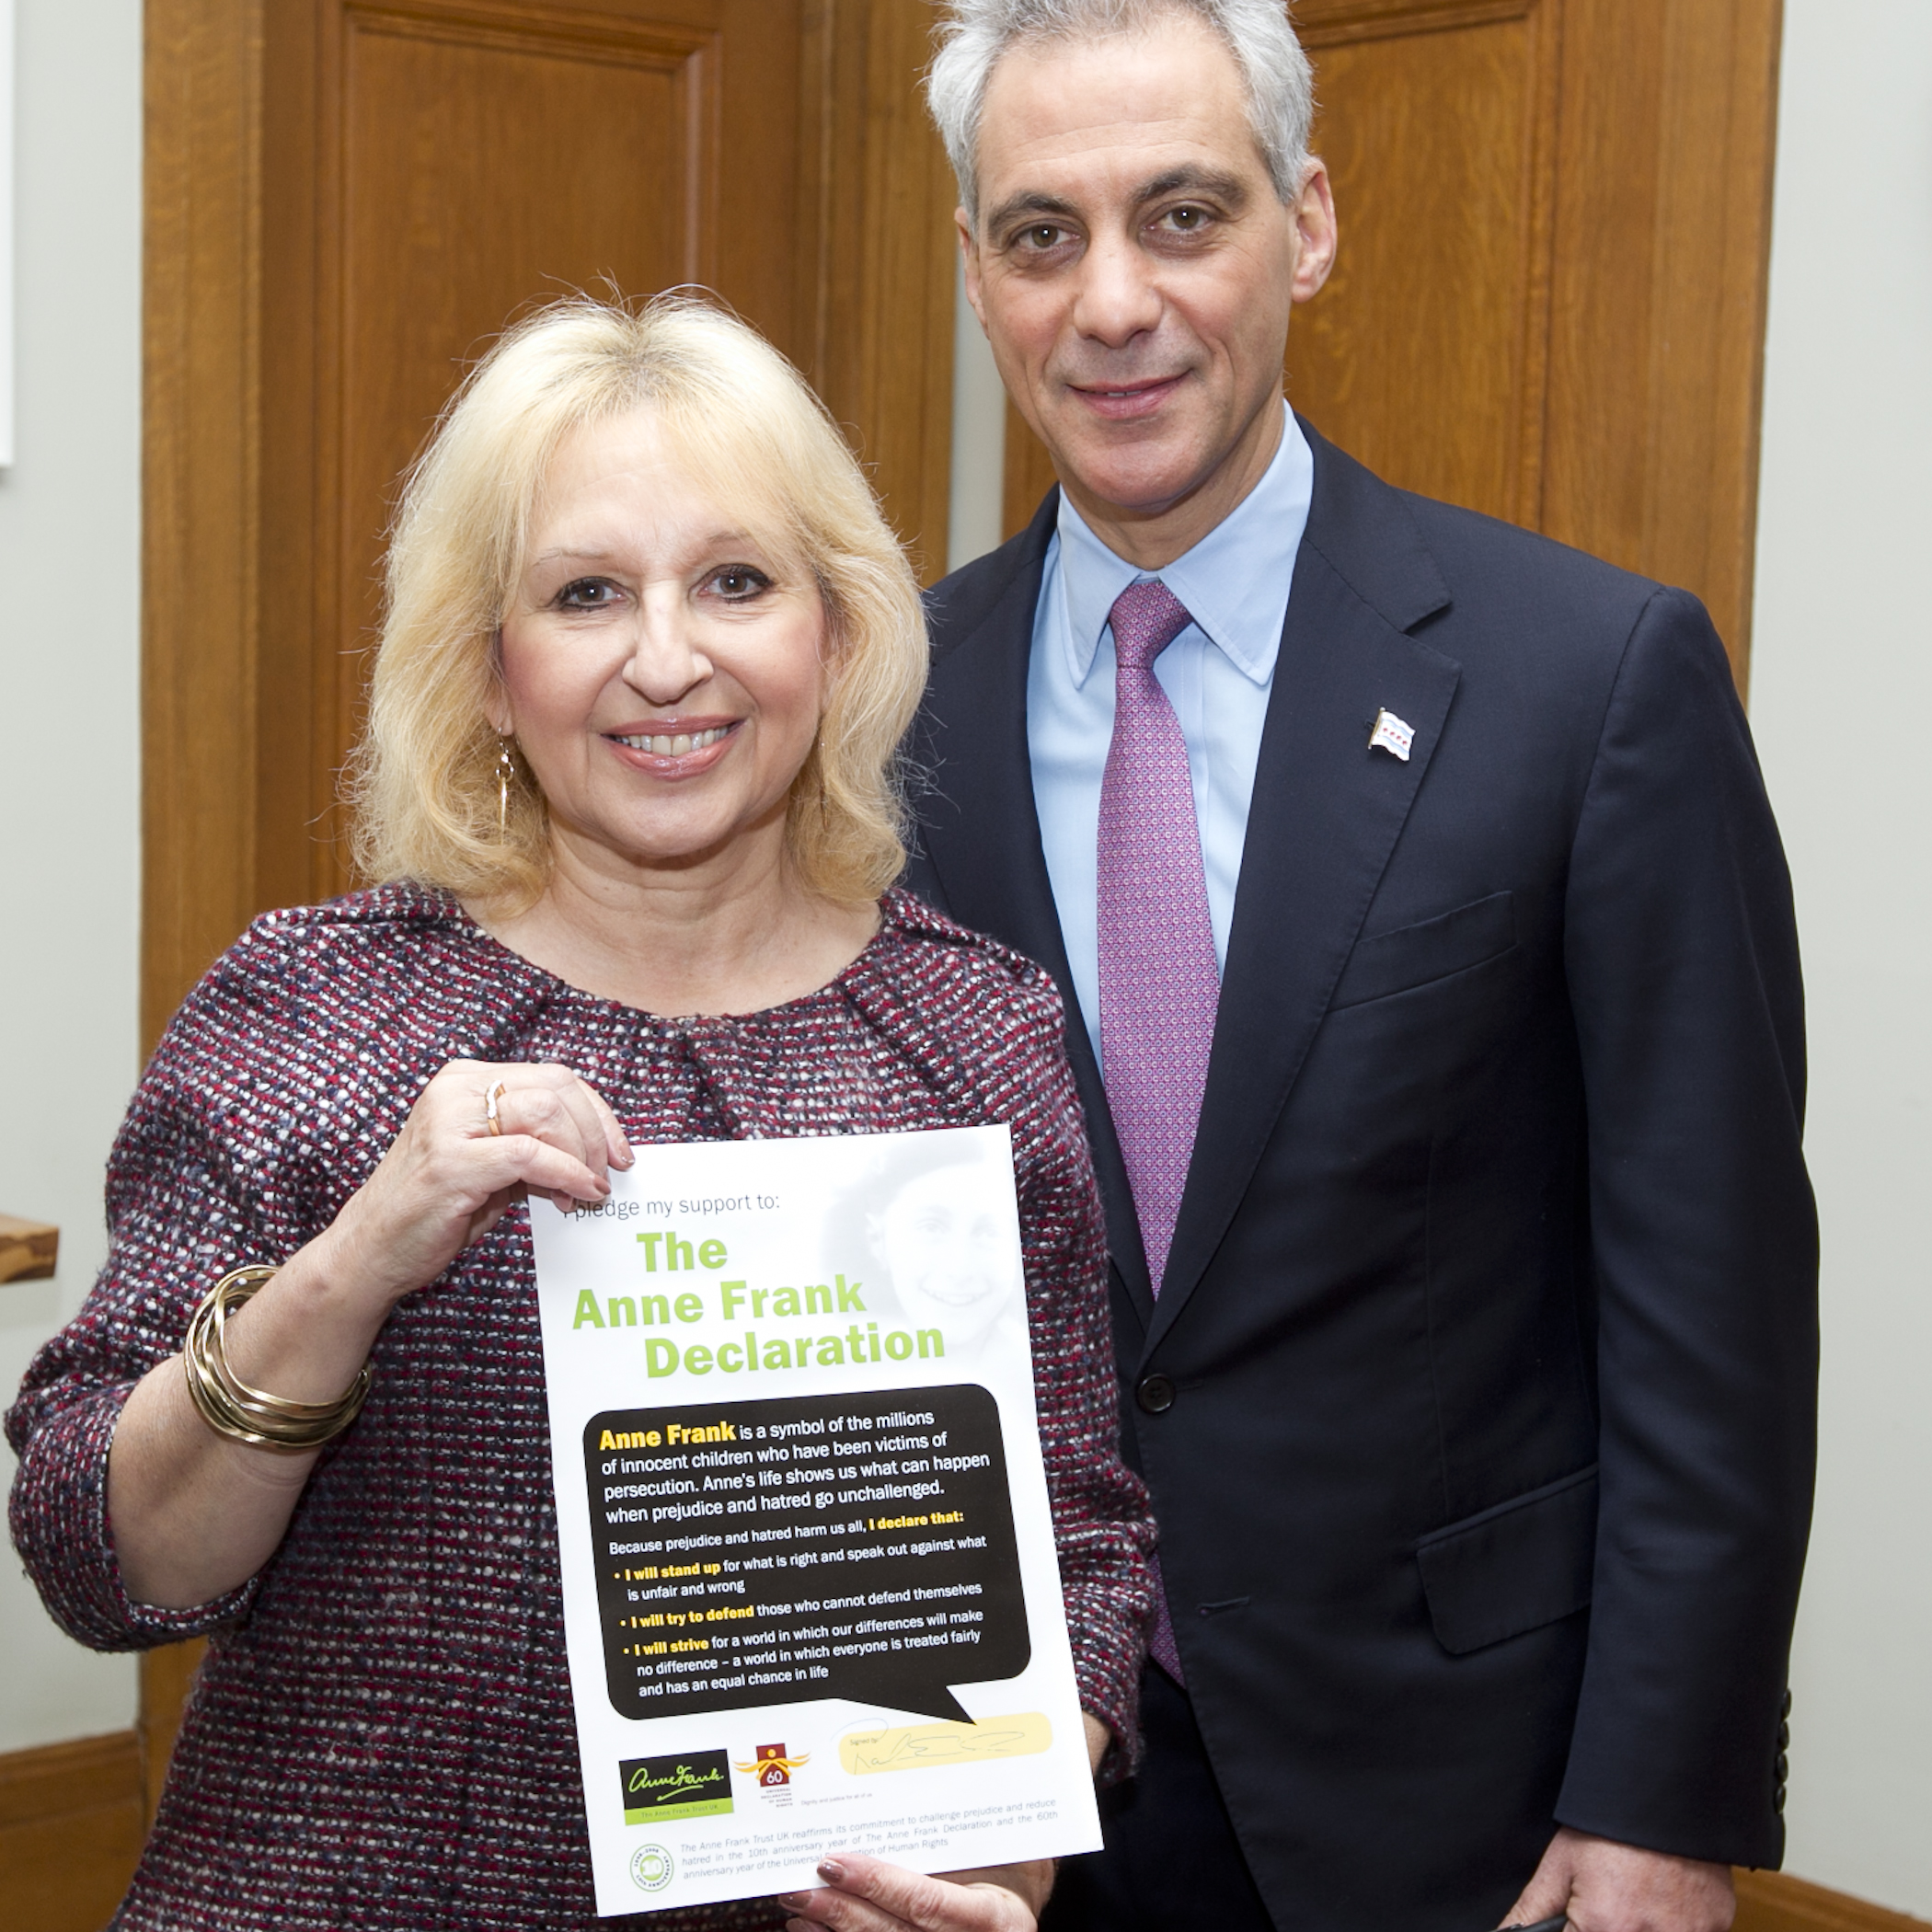 Mayor Emanuel welcomes Gillian Walnes MBE to Chicago, signing the Anne Frank Declaration to fight prejudice and hatred.